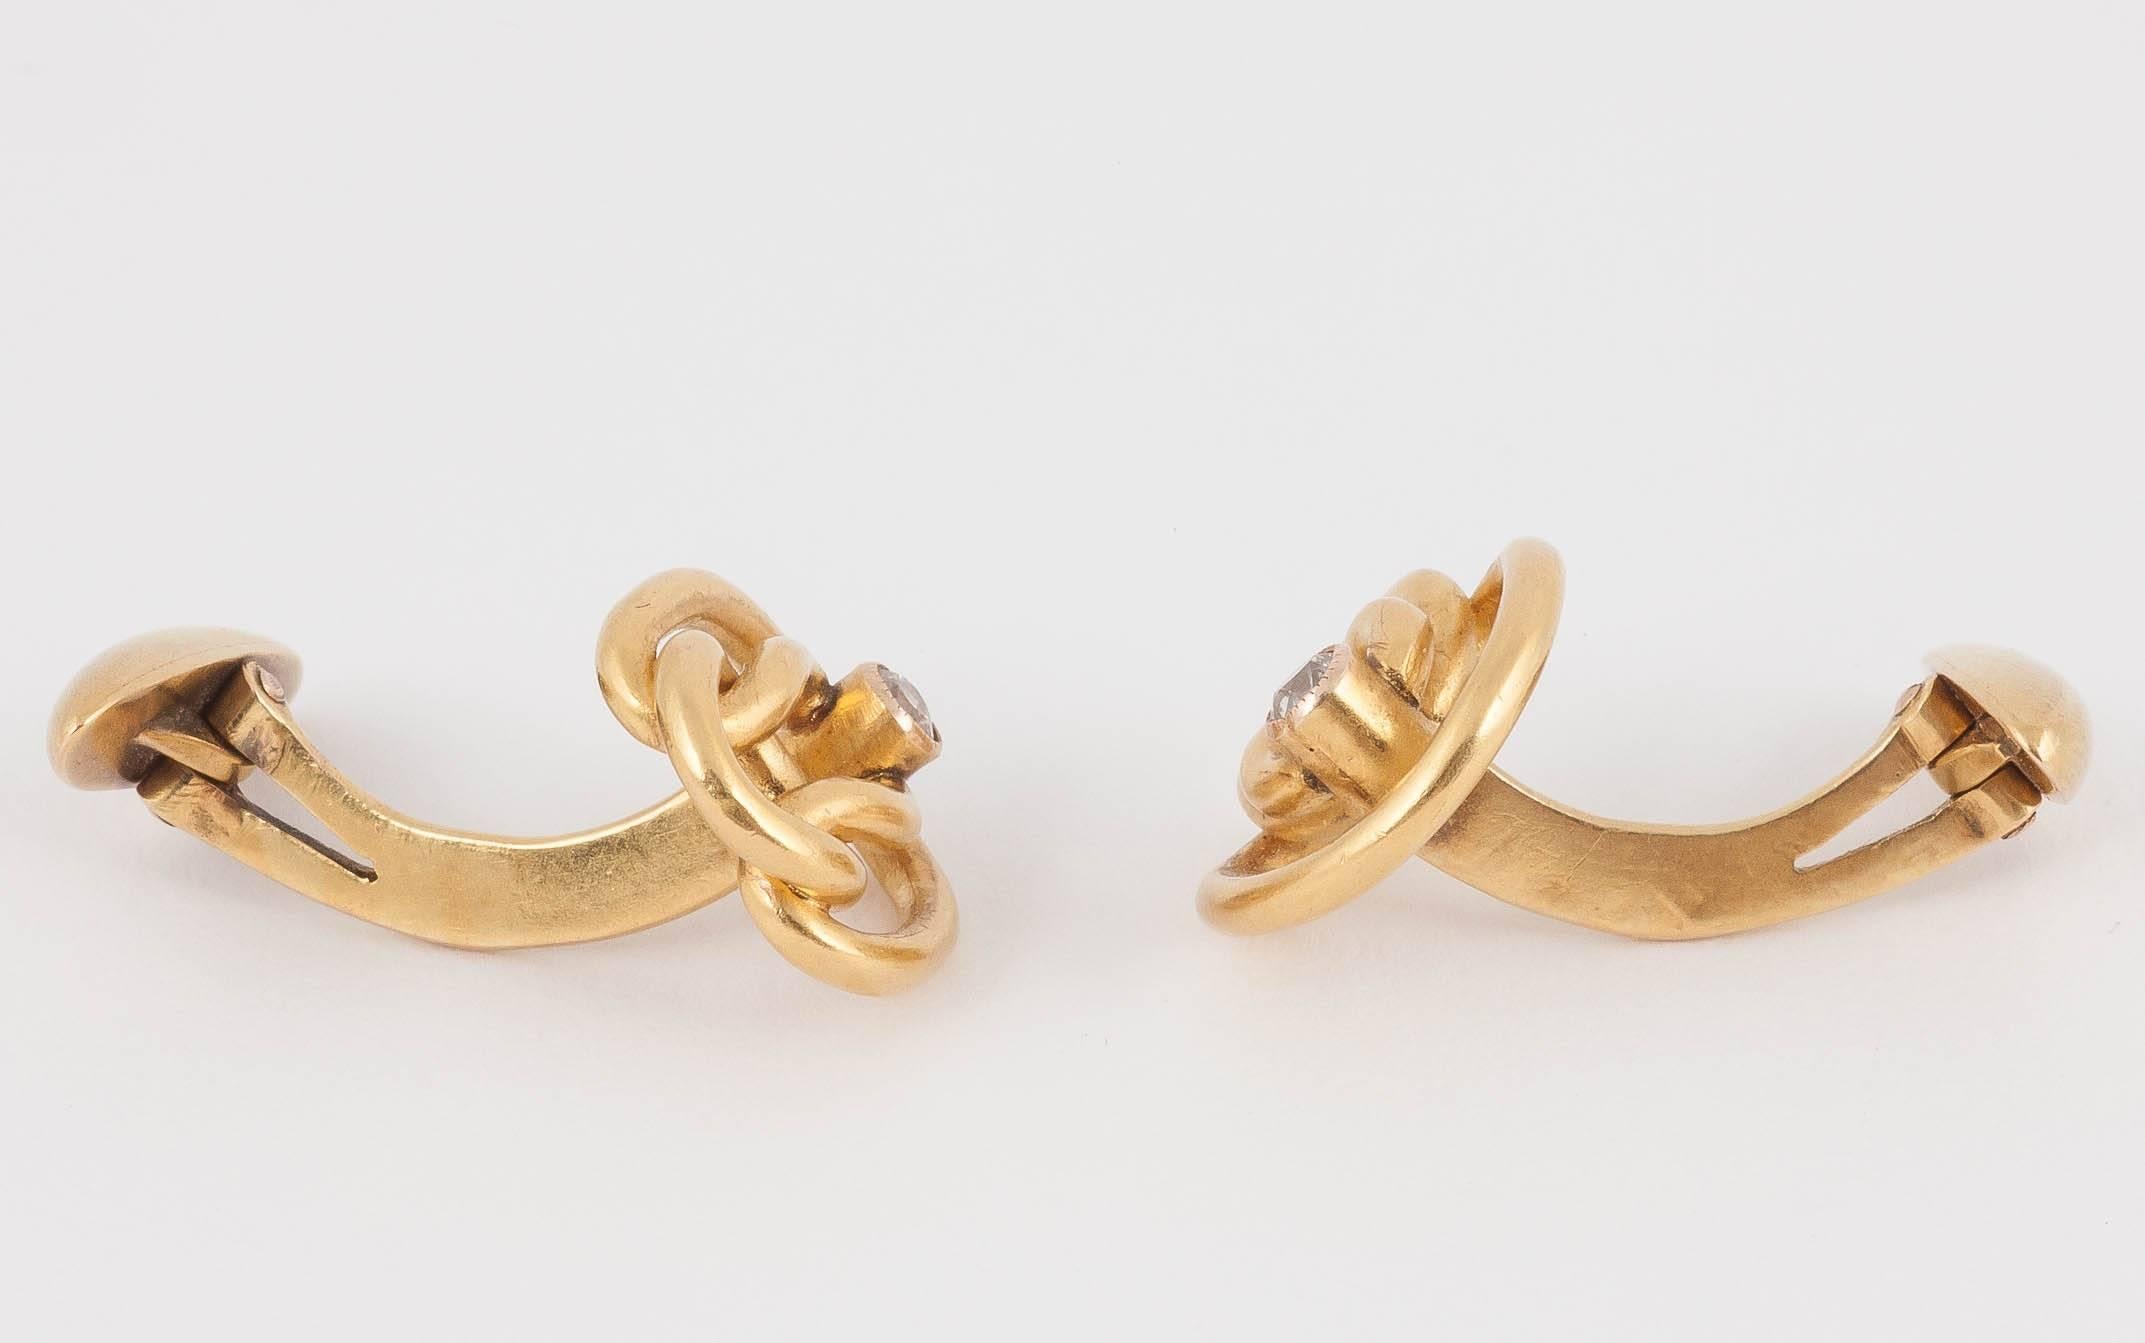 An unusual pair of antique cufflinks in 14 karat yellow gold. Russian made in an openwork design of entwined knots with an old cut diamond collet. Single sided with swivel torpedo terminals.
Measures 15mm across.
Antique (over 100 years old),
Late